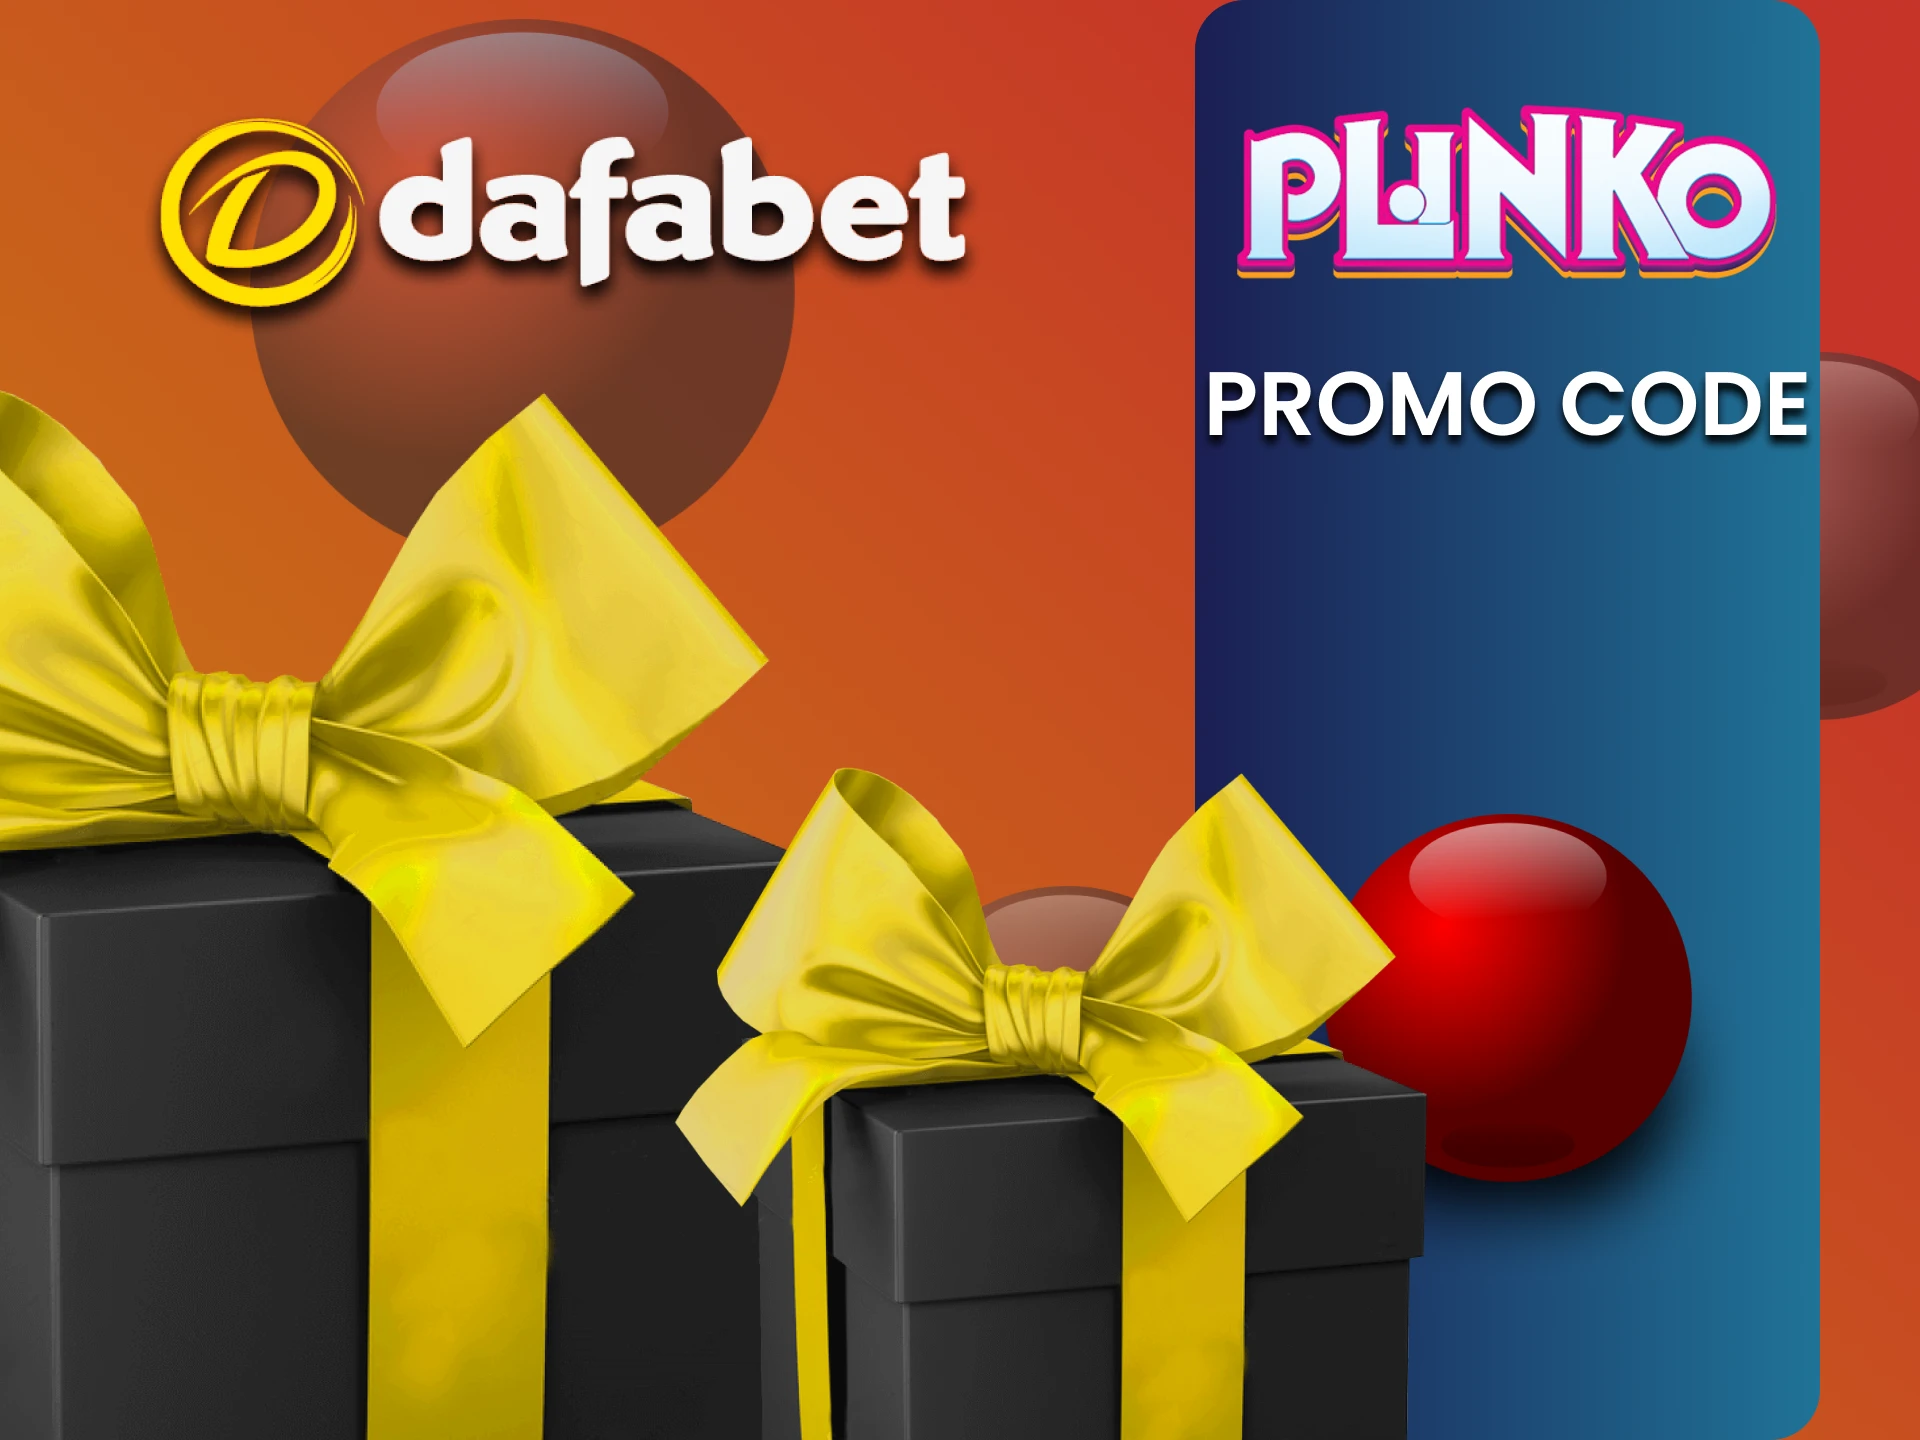 Use the promo code for Plinko from Dafabet.